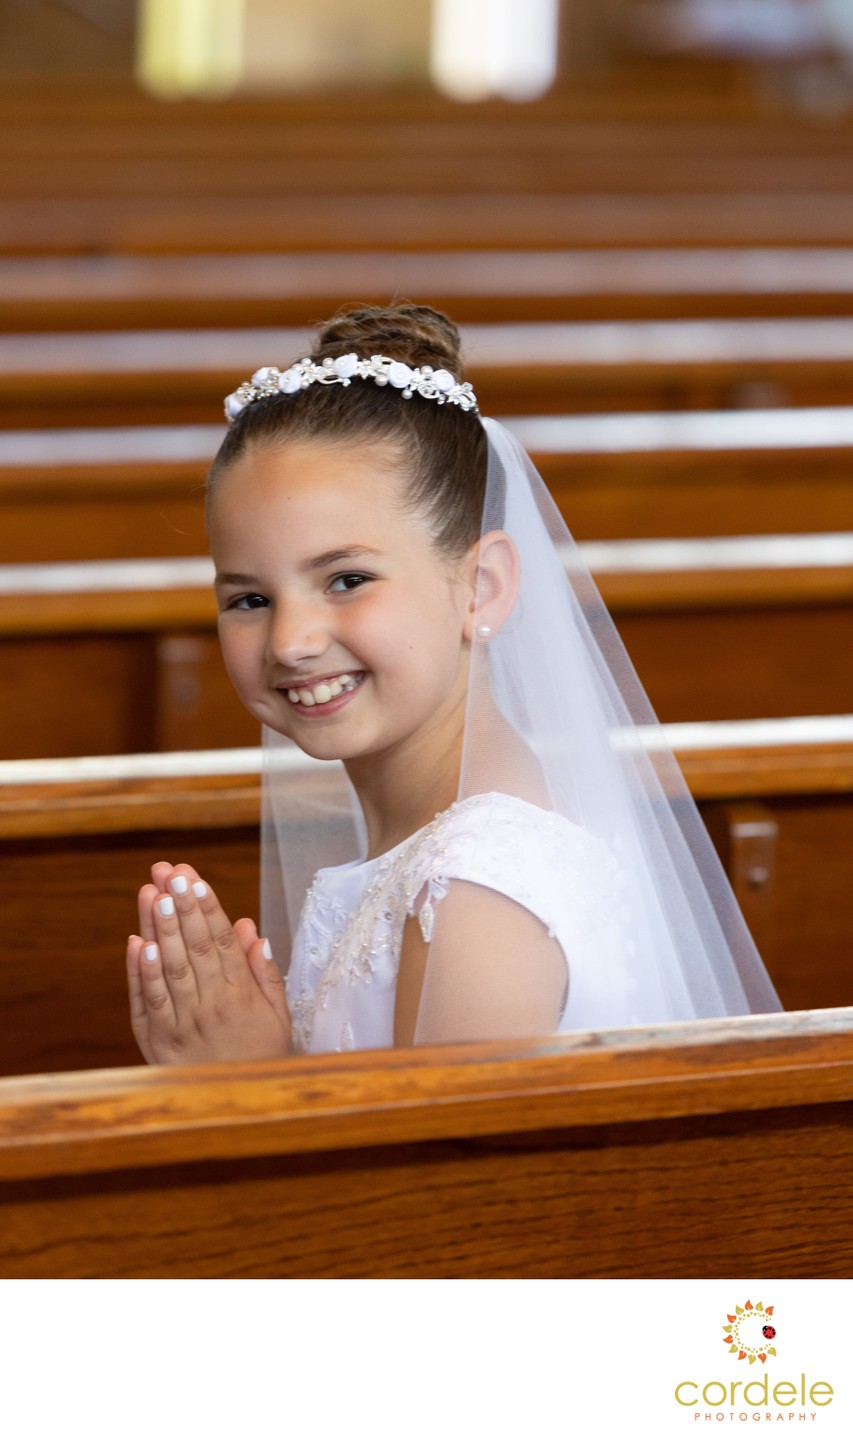 First communion photography north of Boston.  